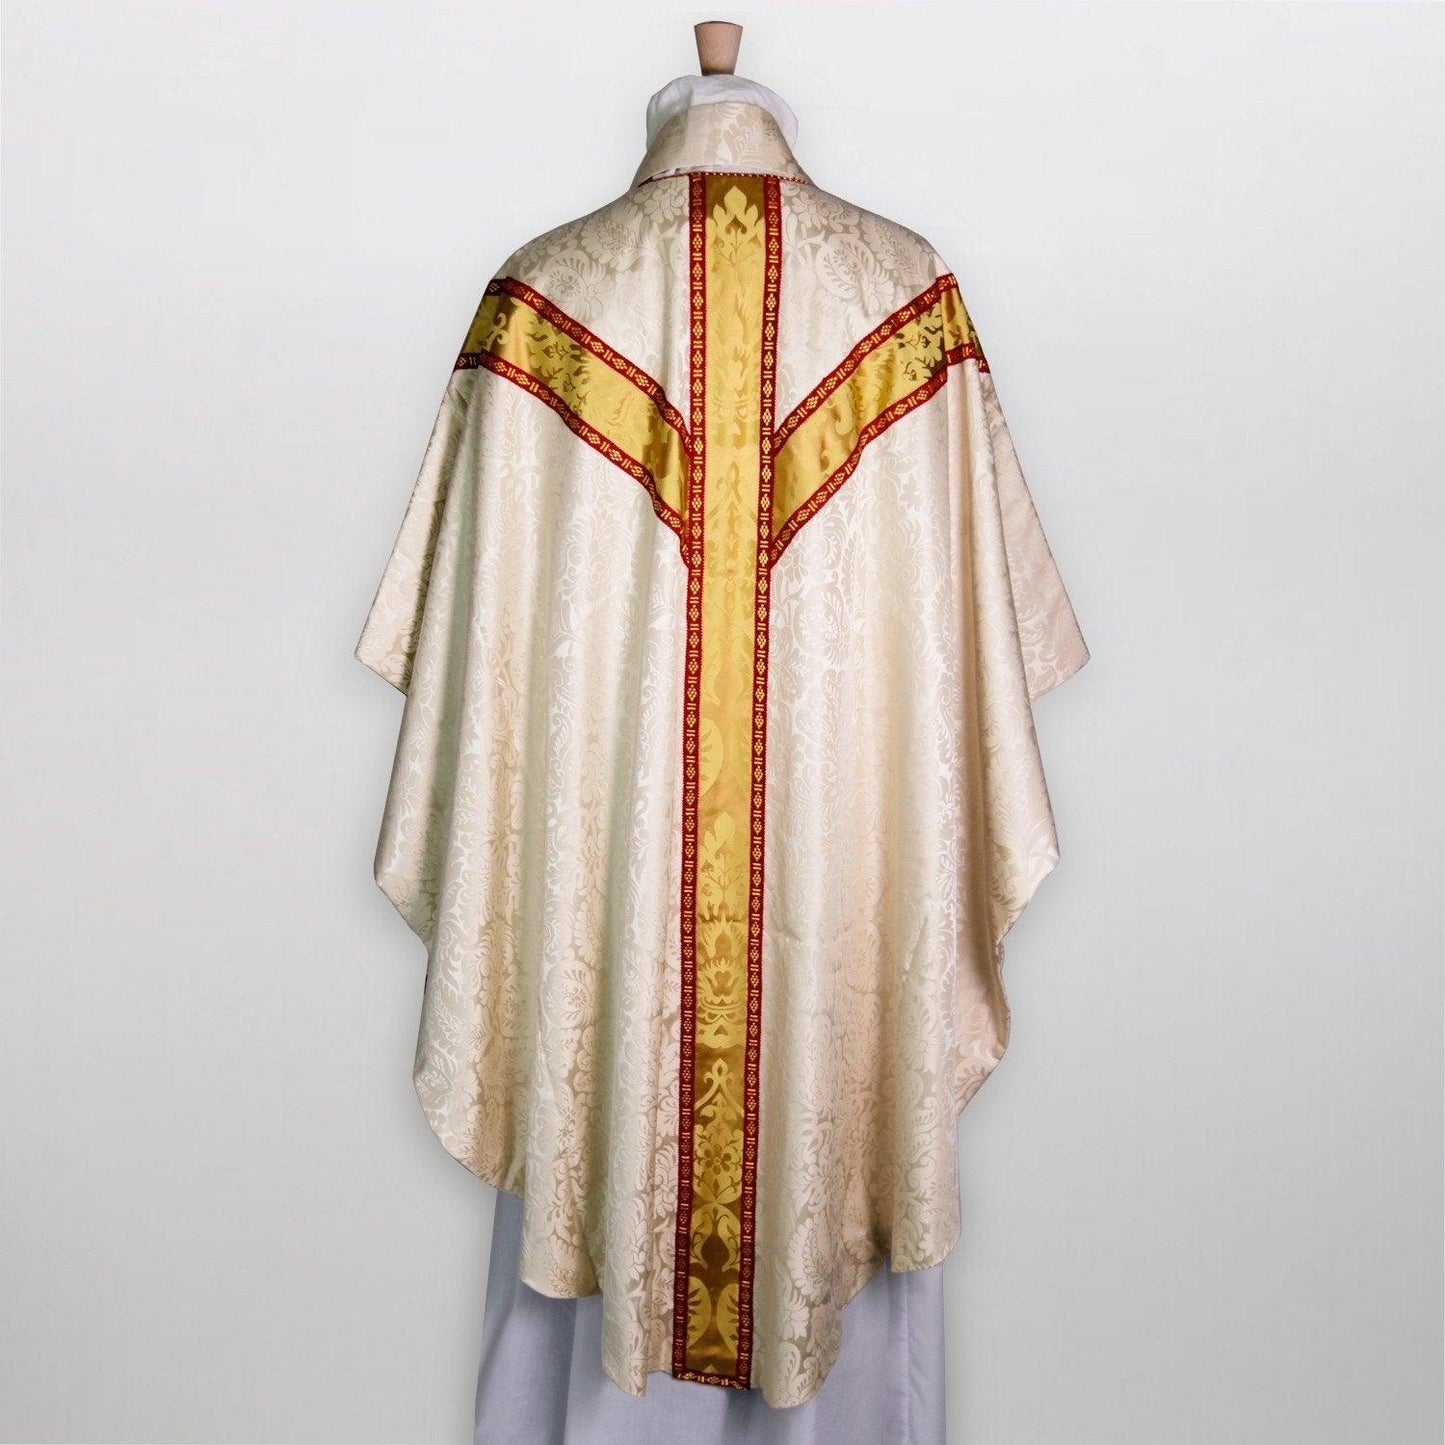 Full Gothic Chasuble in Cream Holbein - Watts & Co. (international)